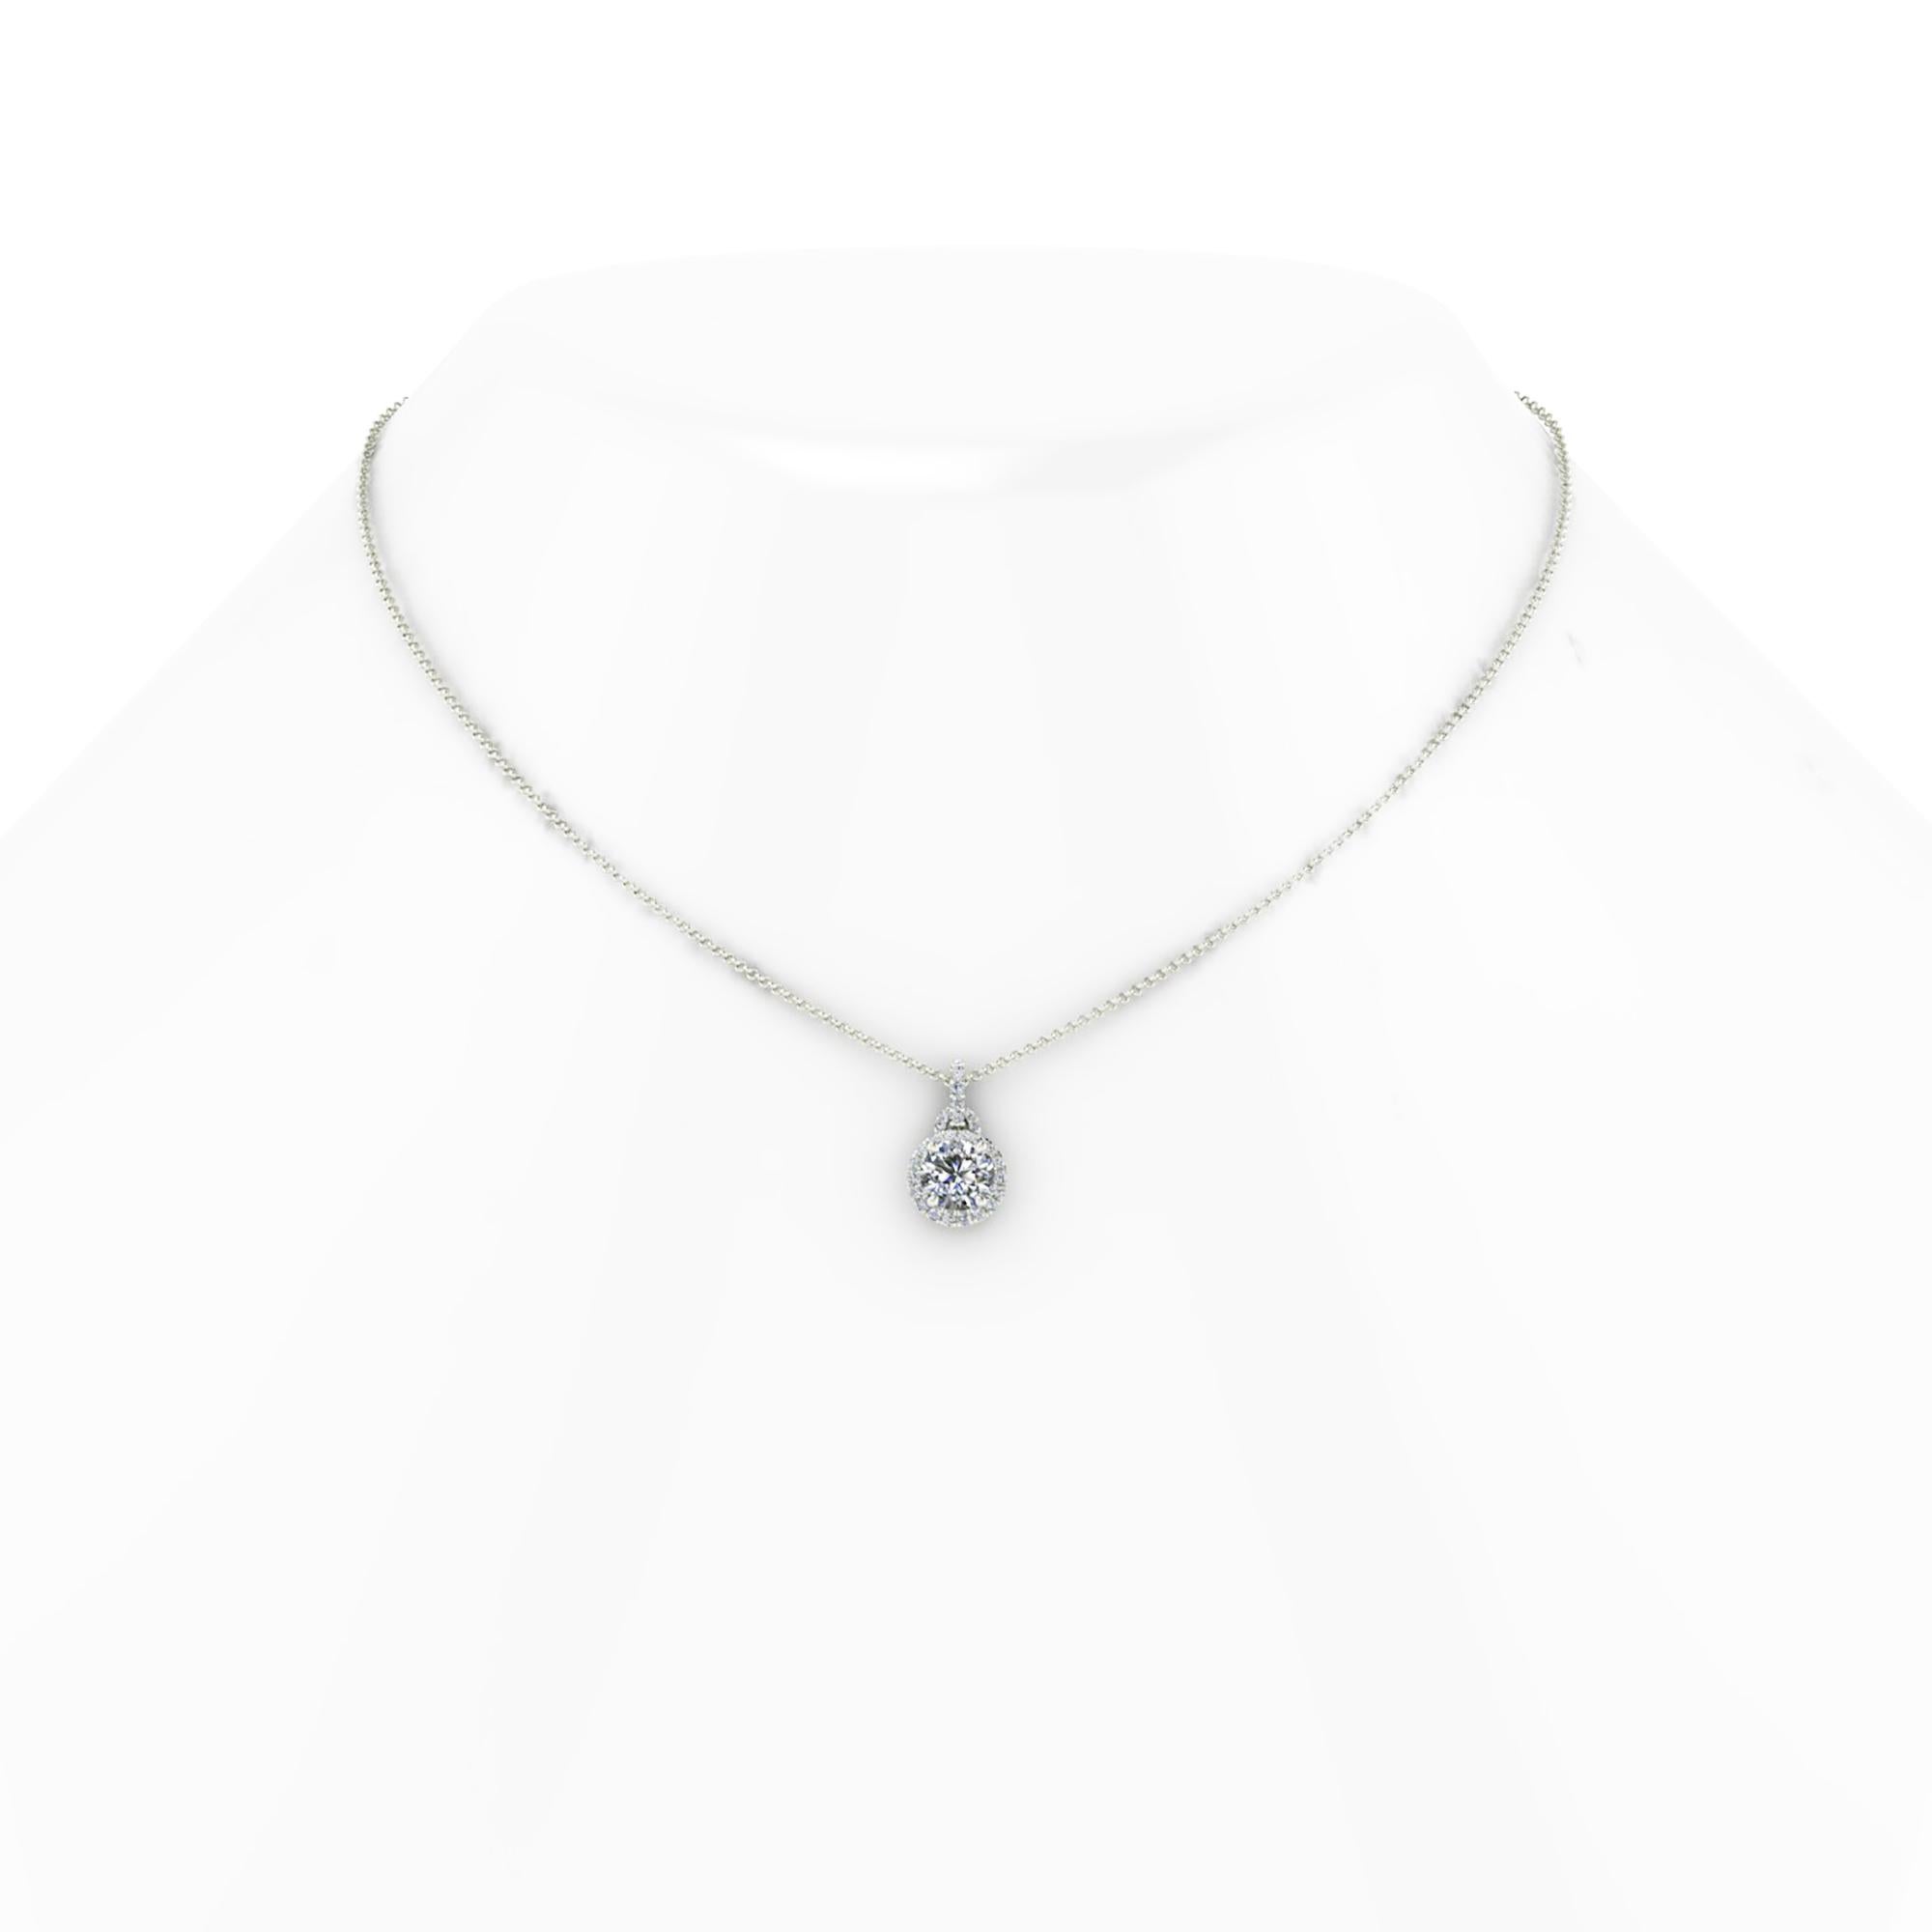 1.01 carat GIA Certified round brilliant cut diamond, H color, VS2 clarity, Platinum 950 diamond halo necklace, with a total diamond carat weight of 1.20 carat, with Platinum think cable chain with 16